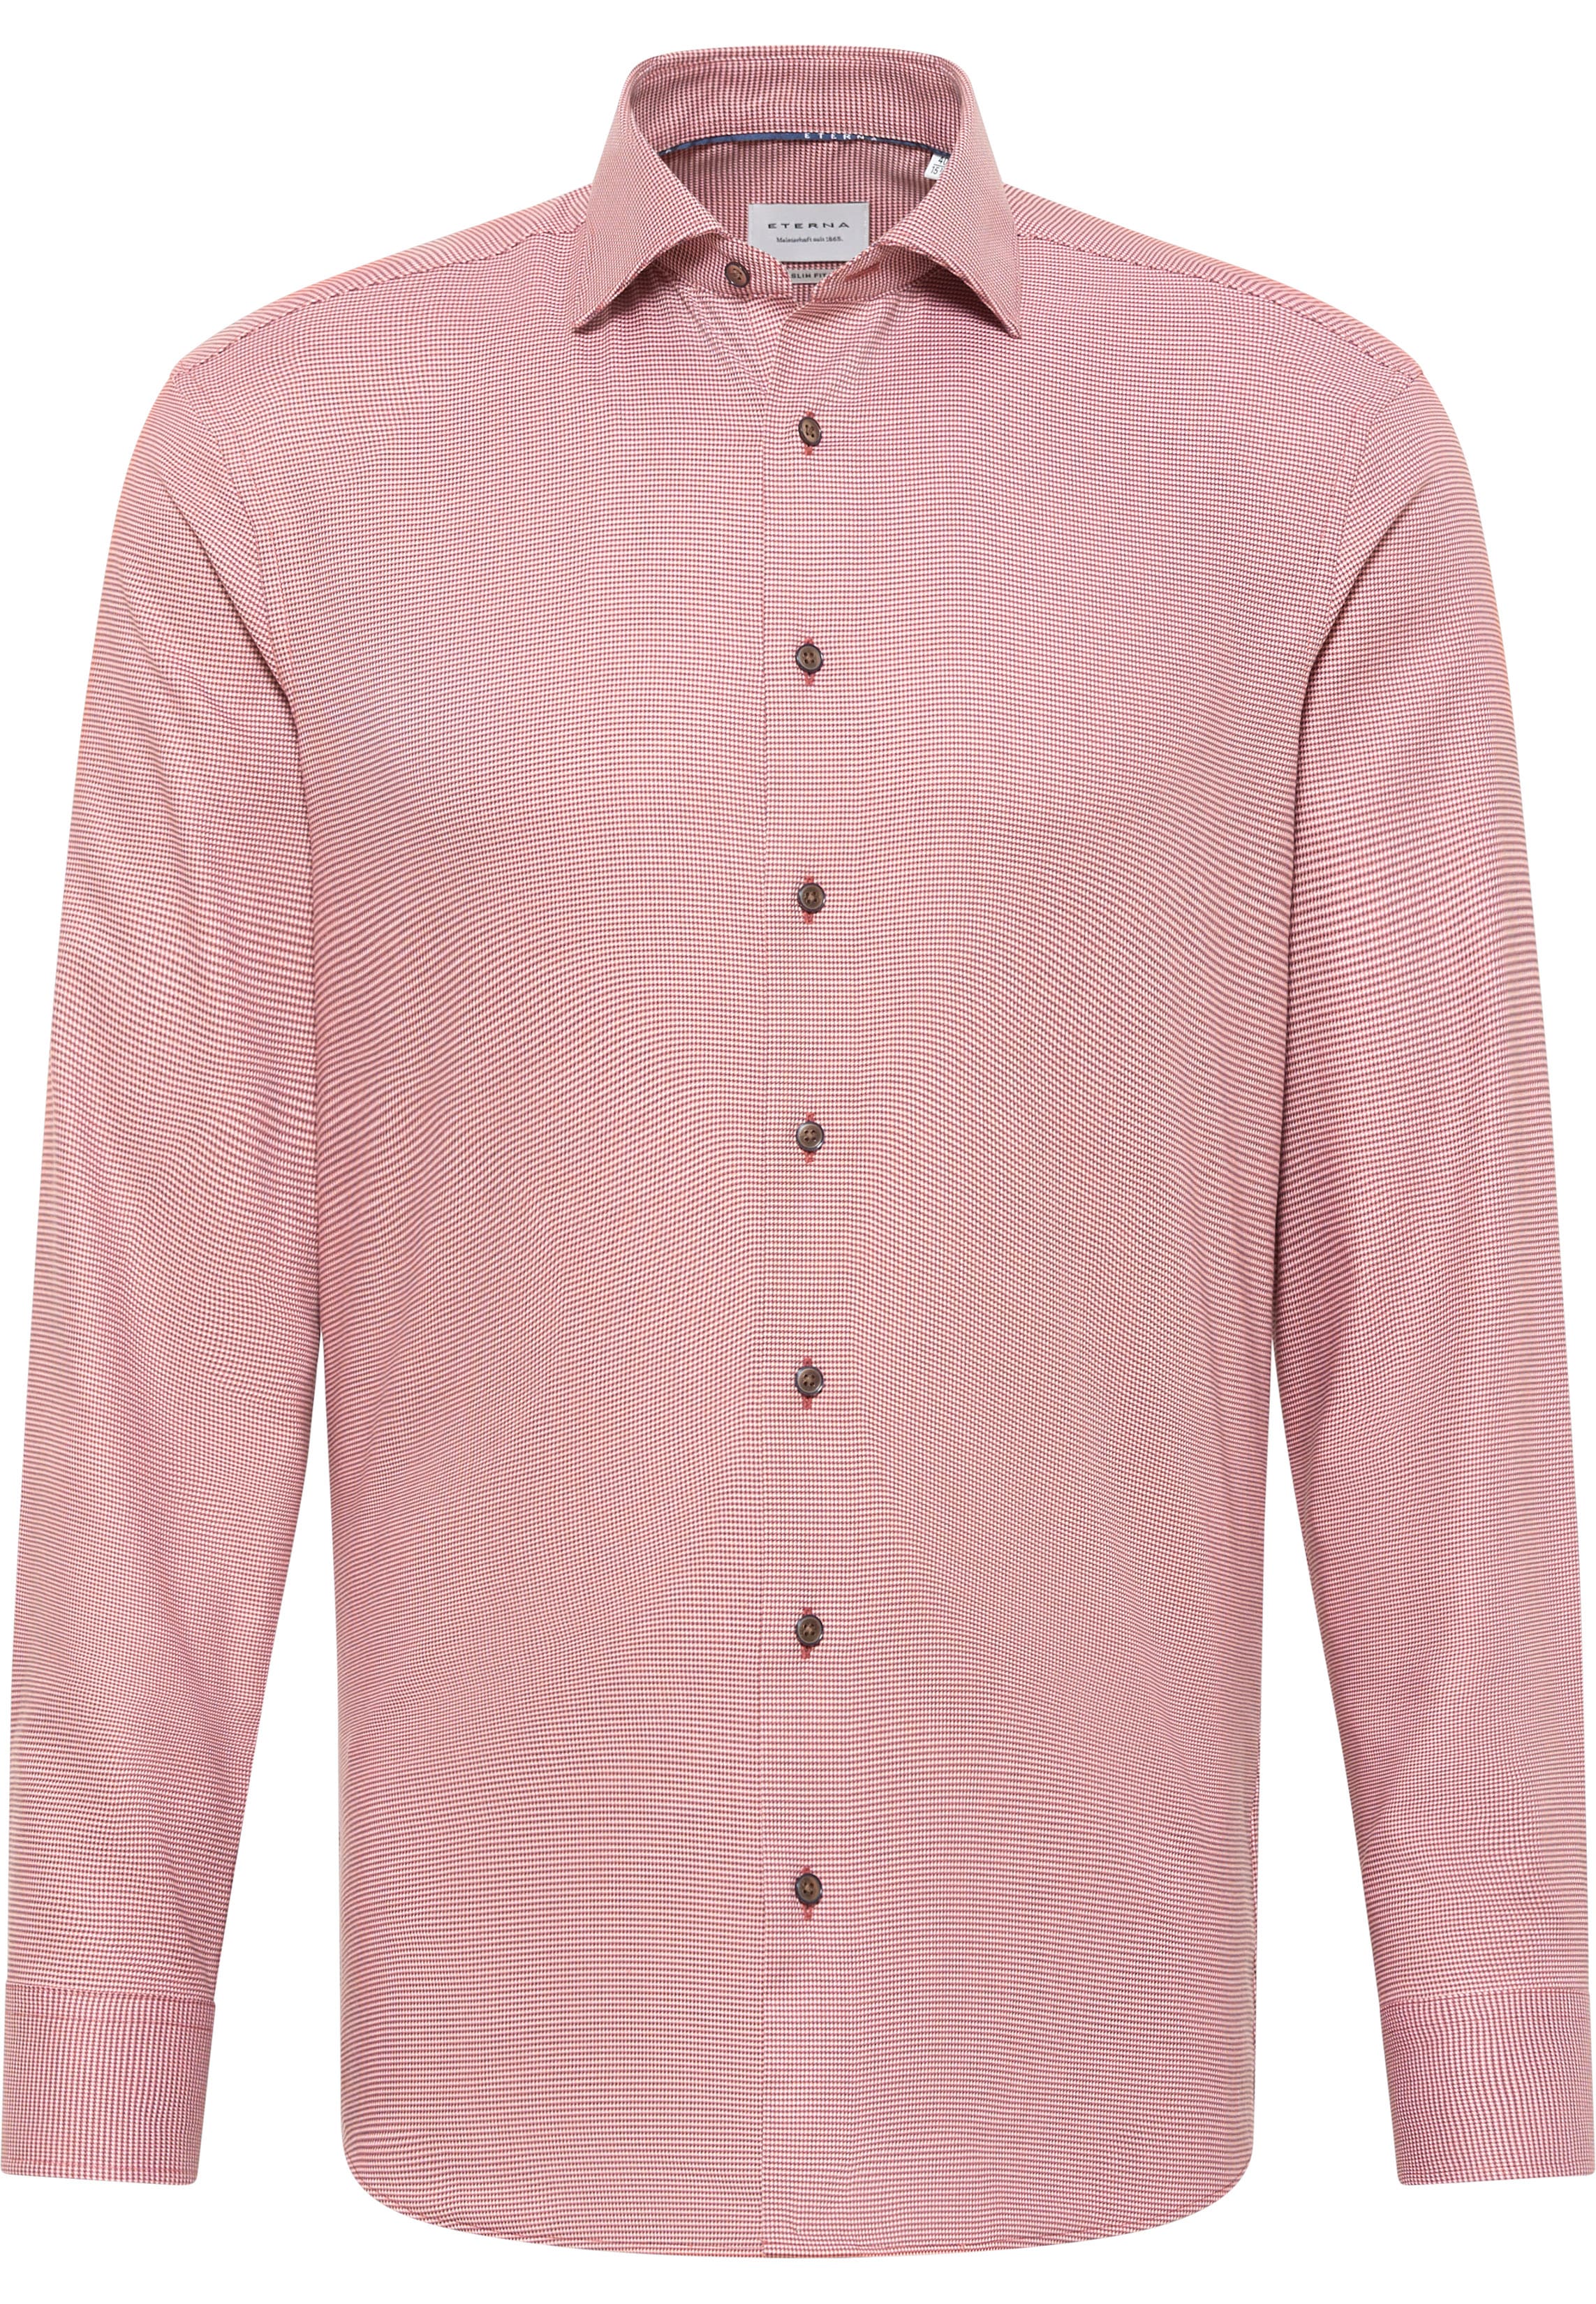 SLIM FIT Shirt in light red structured